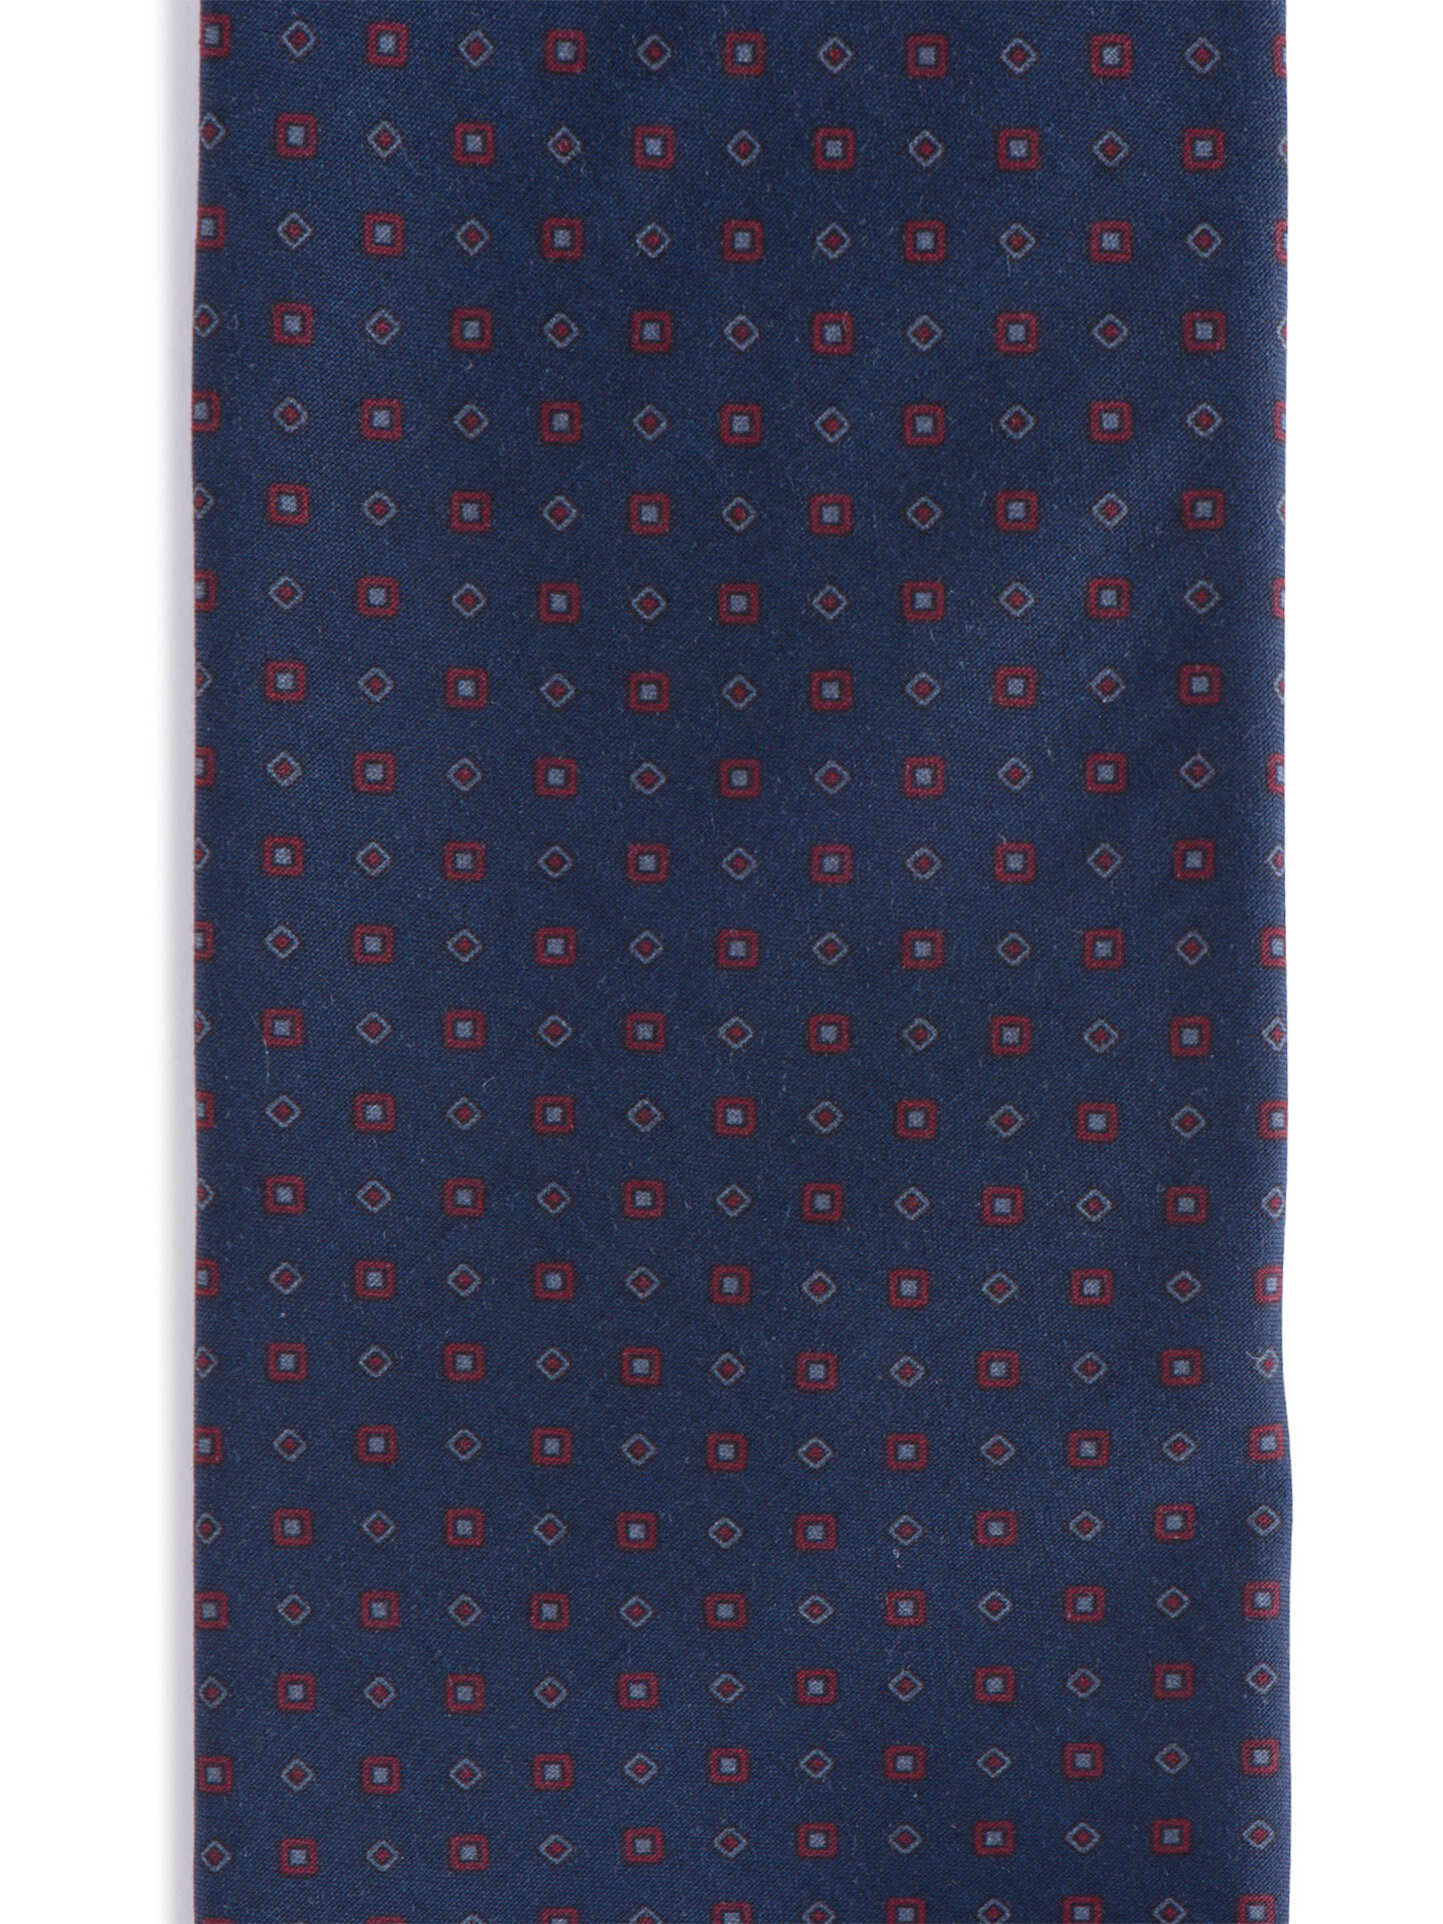 Firenze Navy and Red Madder Print Tie by Proper Cloth